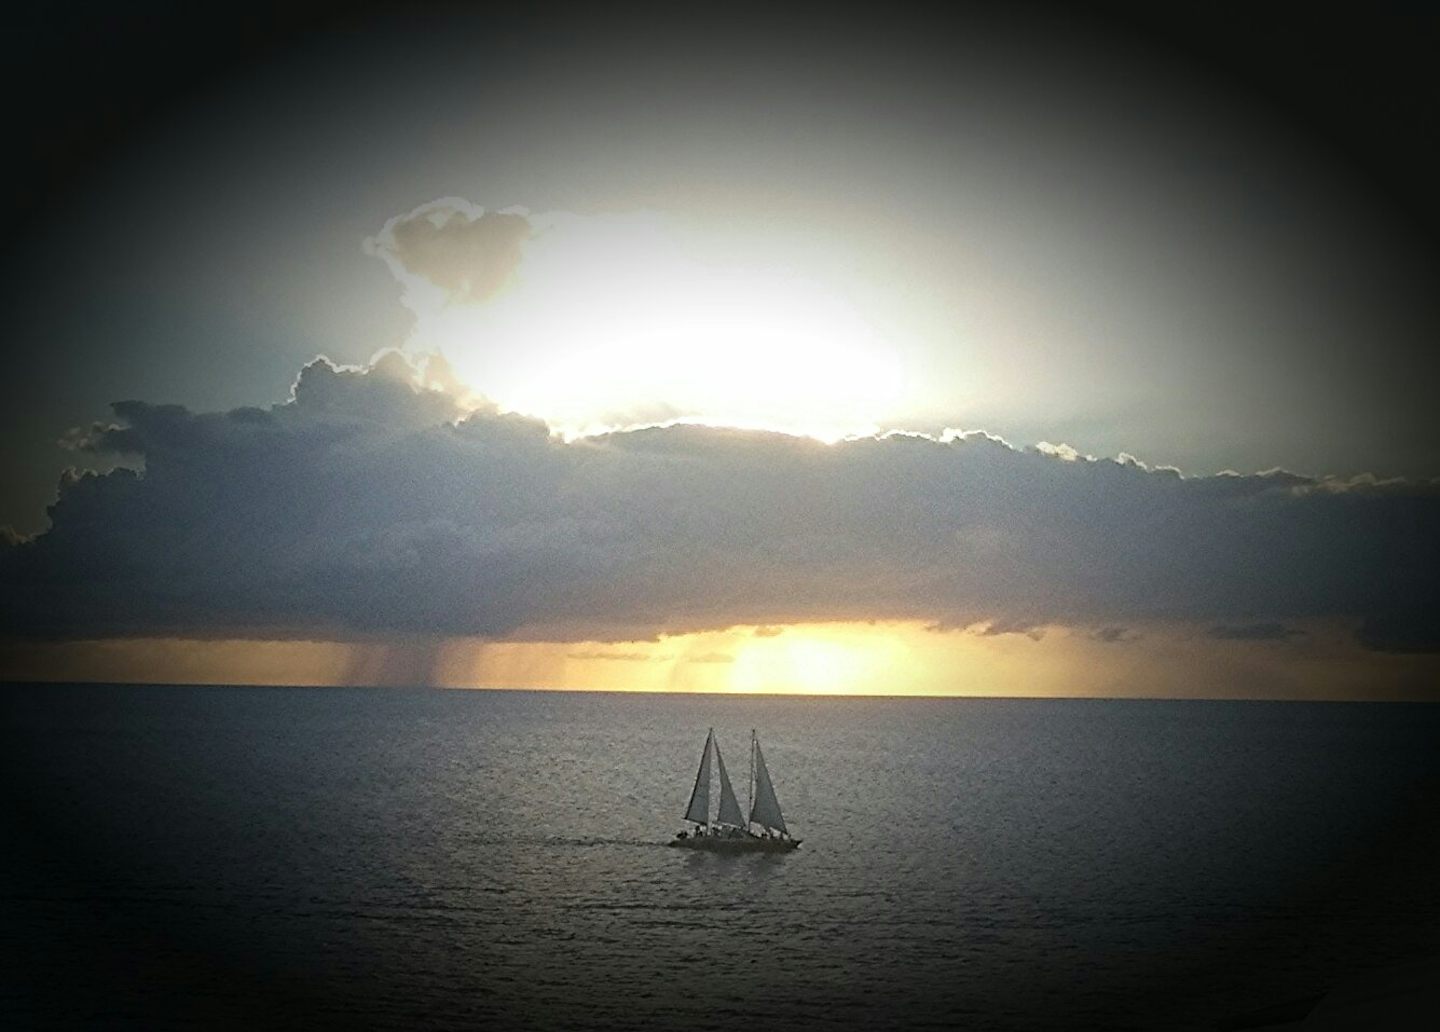 This is a sailboat at sunset taken from our sunset veranda.